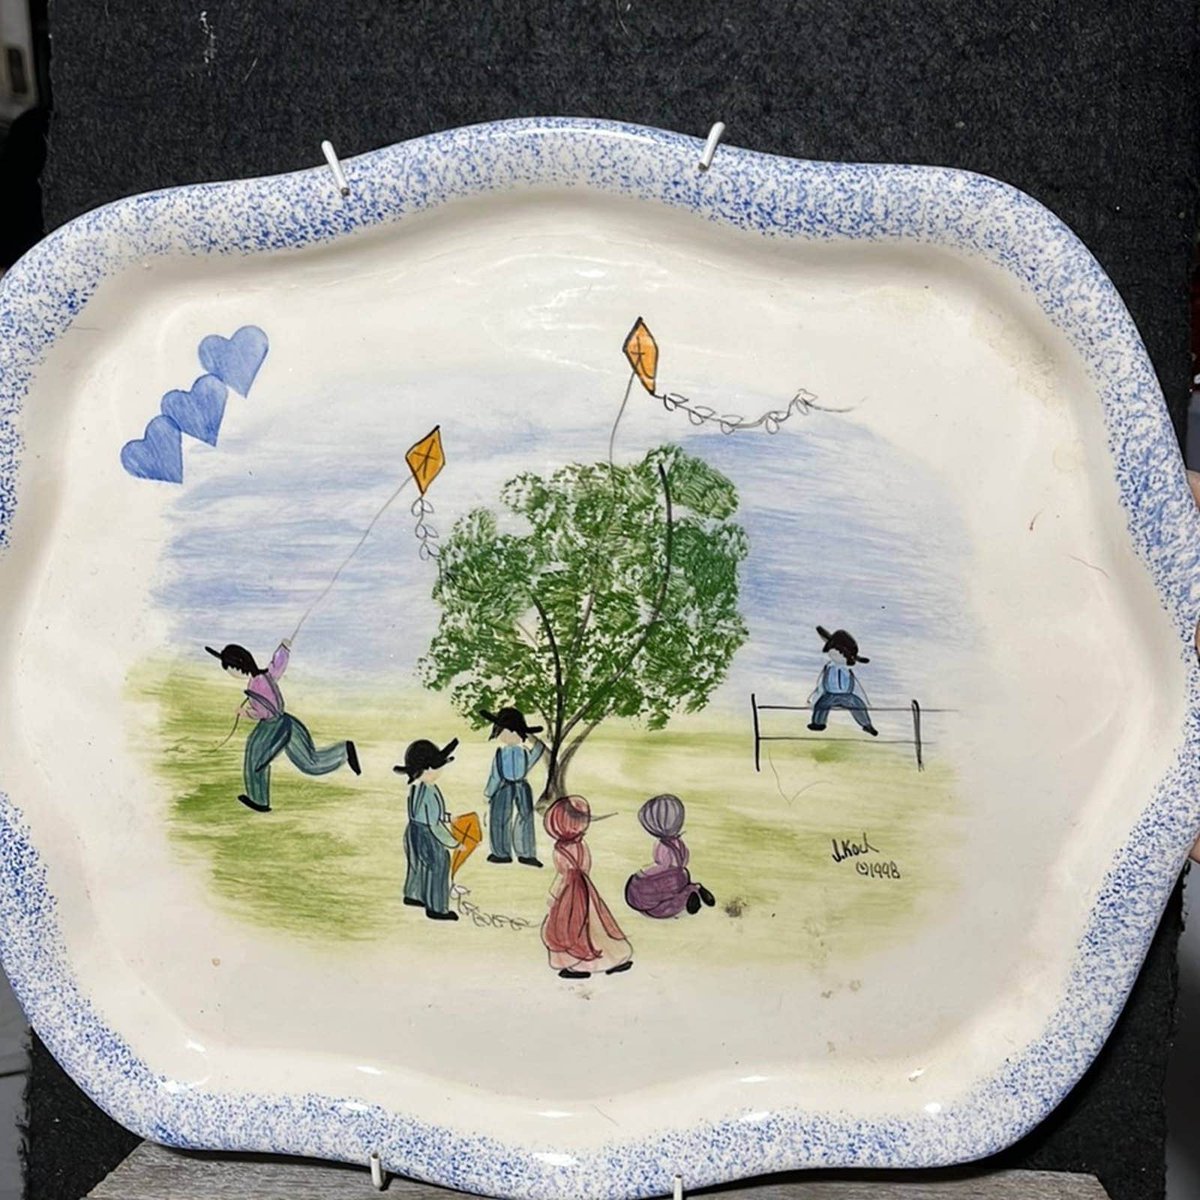 Excited to share the latest addition to my #etsy shop: Signed Amish Serving Platter Hand Painted - Vintage Home etsy.me/3NxLxu7 #blue #amishplate #servingplate #vintage #handpainted #signed #platter #execellentcondition #jkoch